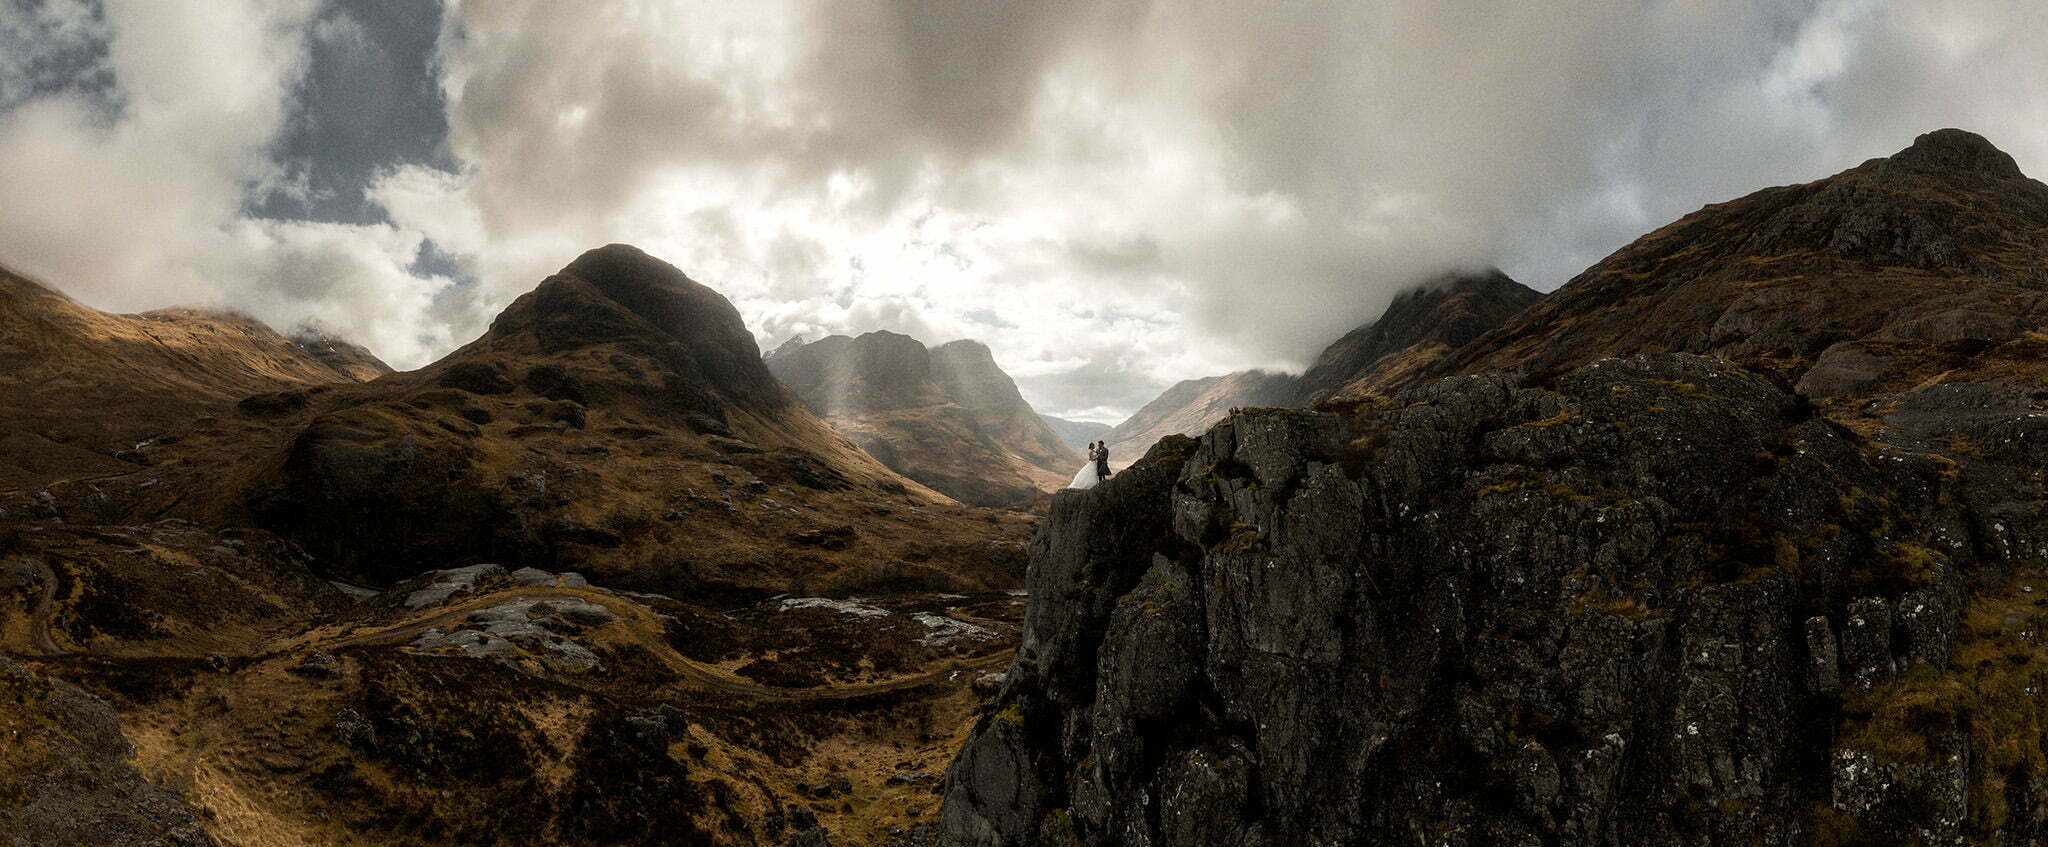 epic landscape of Glencoe with an elopement couple standing in the mountains